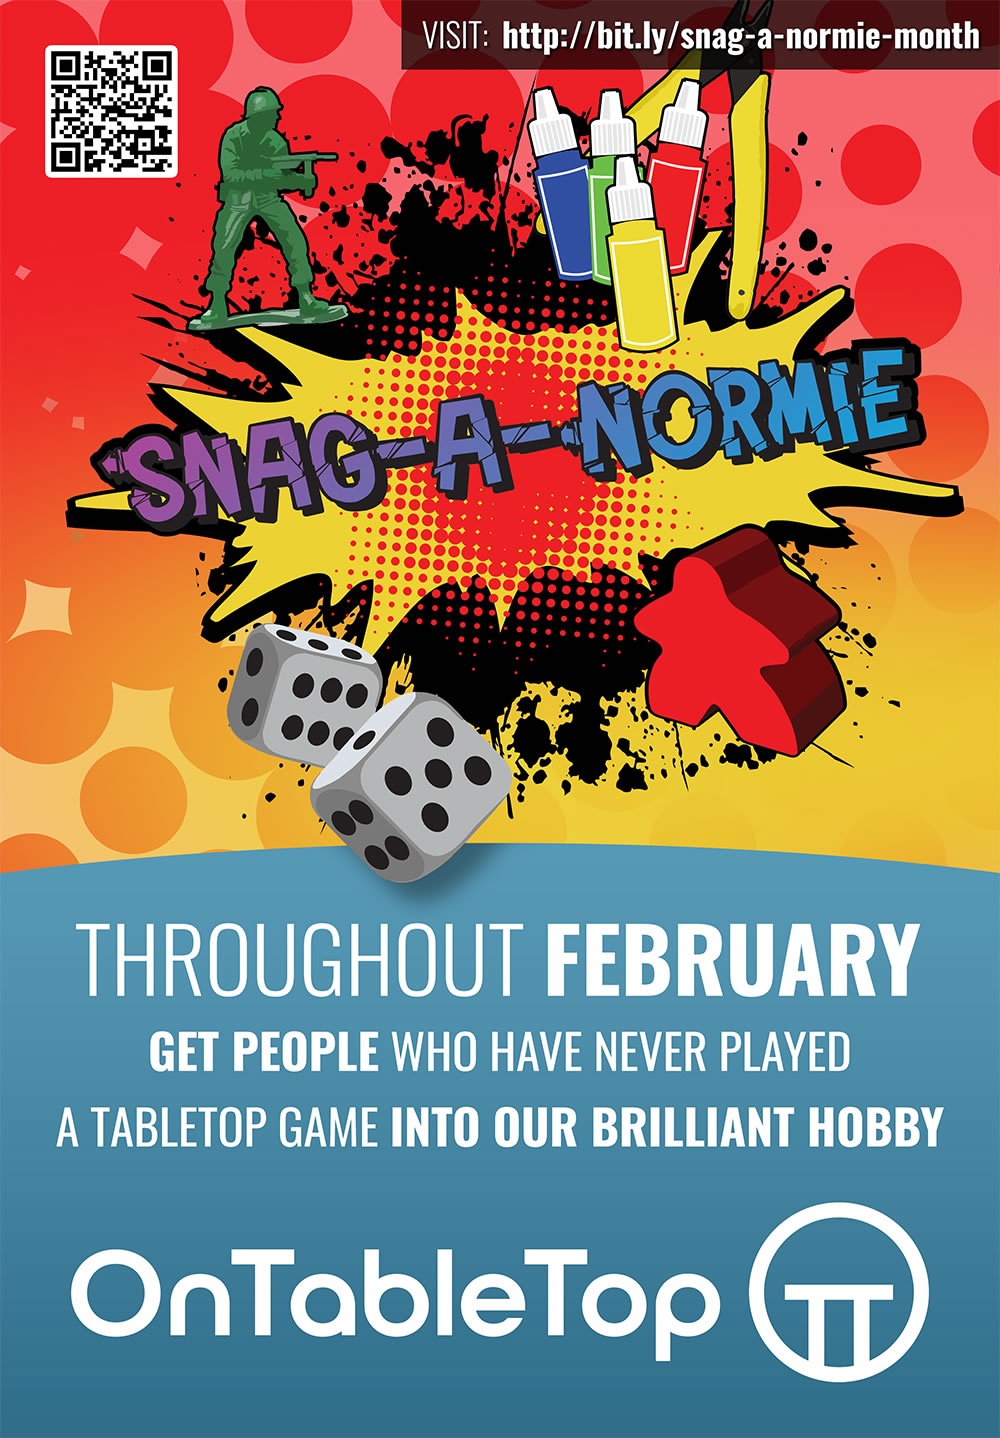 OnTableTop Snag-a-Normie Month